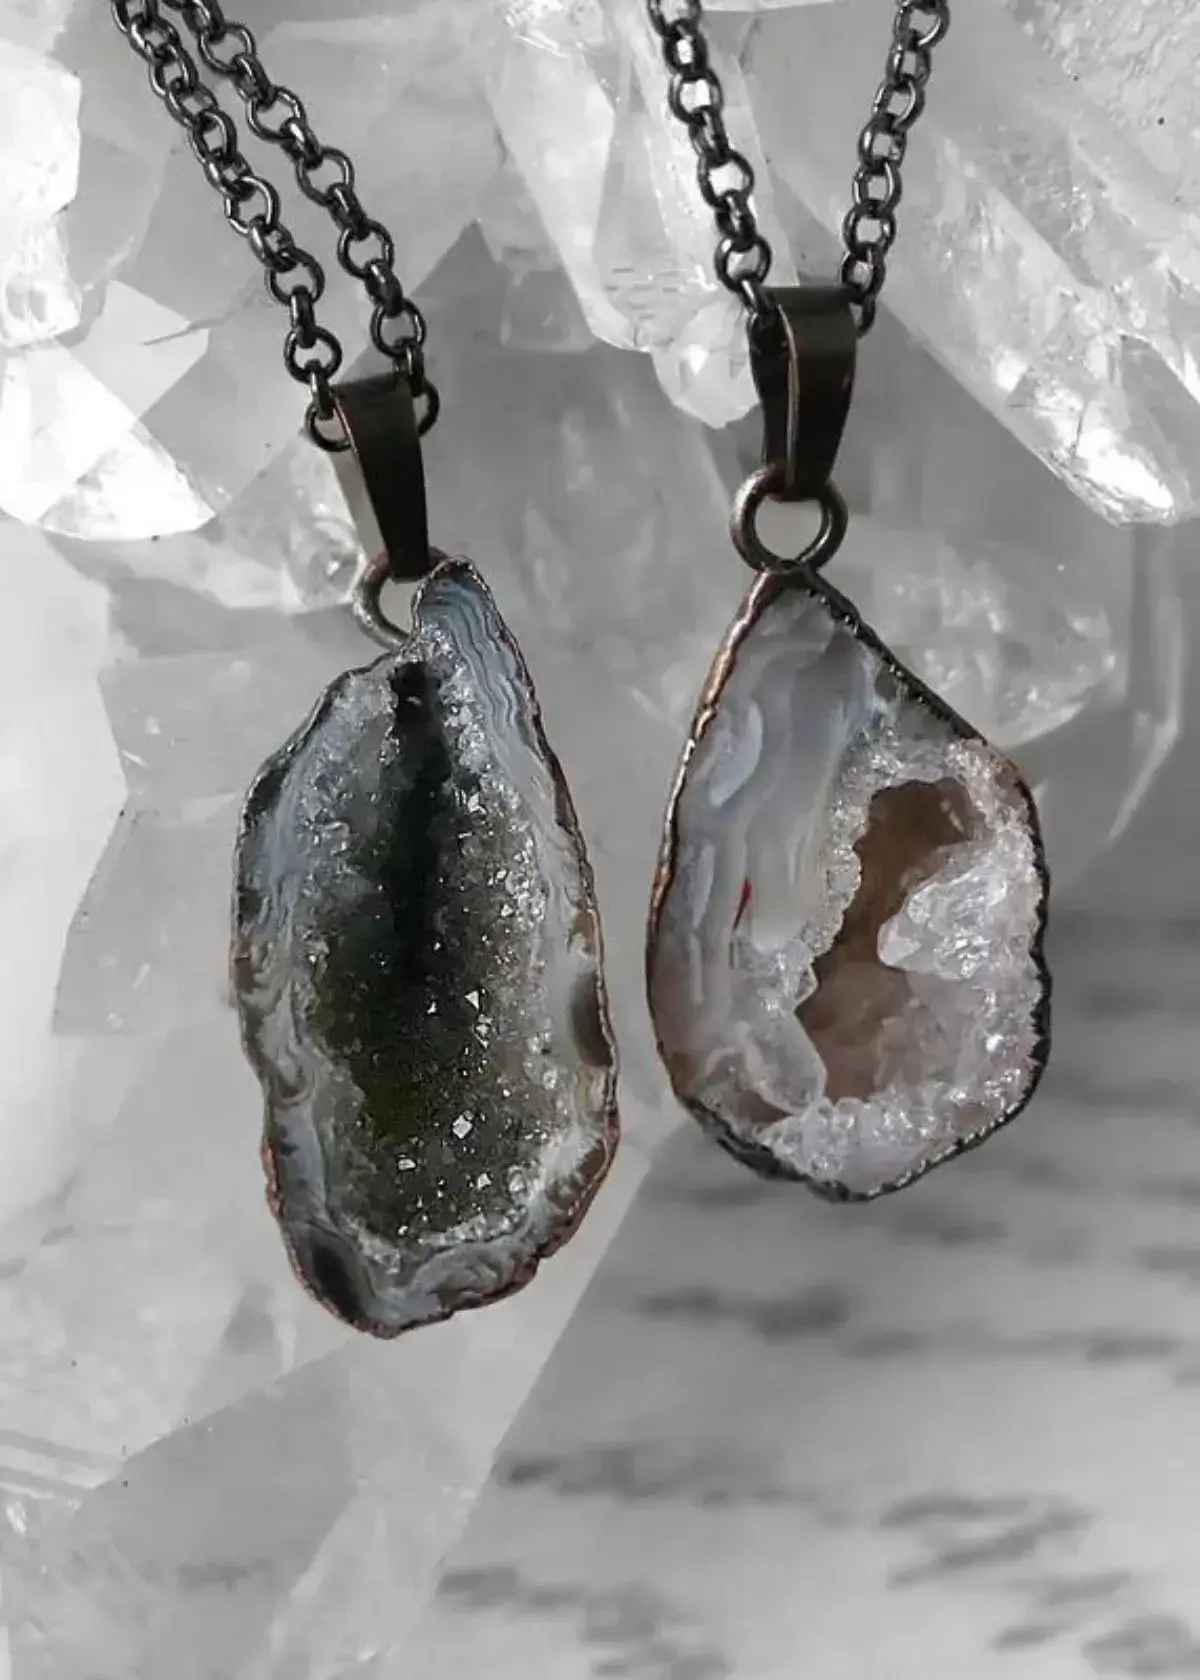 How durable are Geode Necklaces?